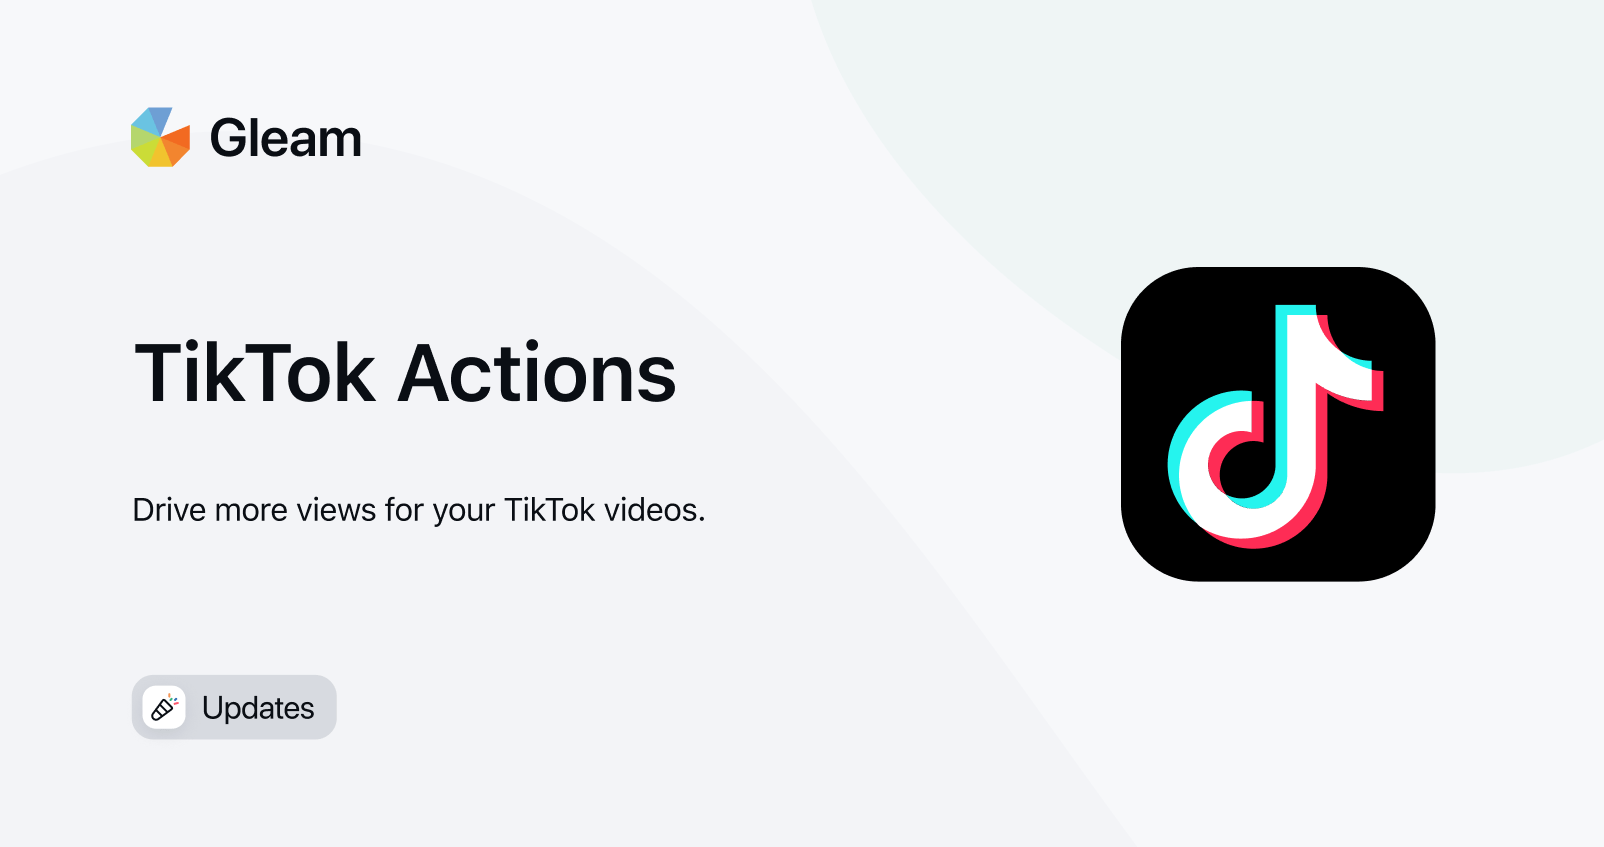 New TikTok Action for Gleam Competitions & Rewards